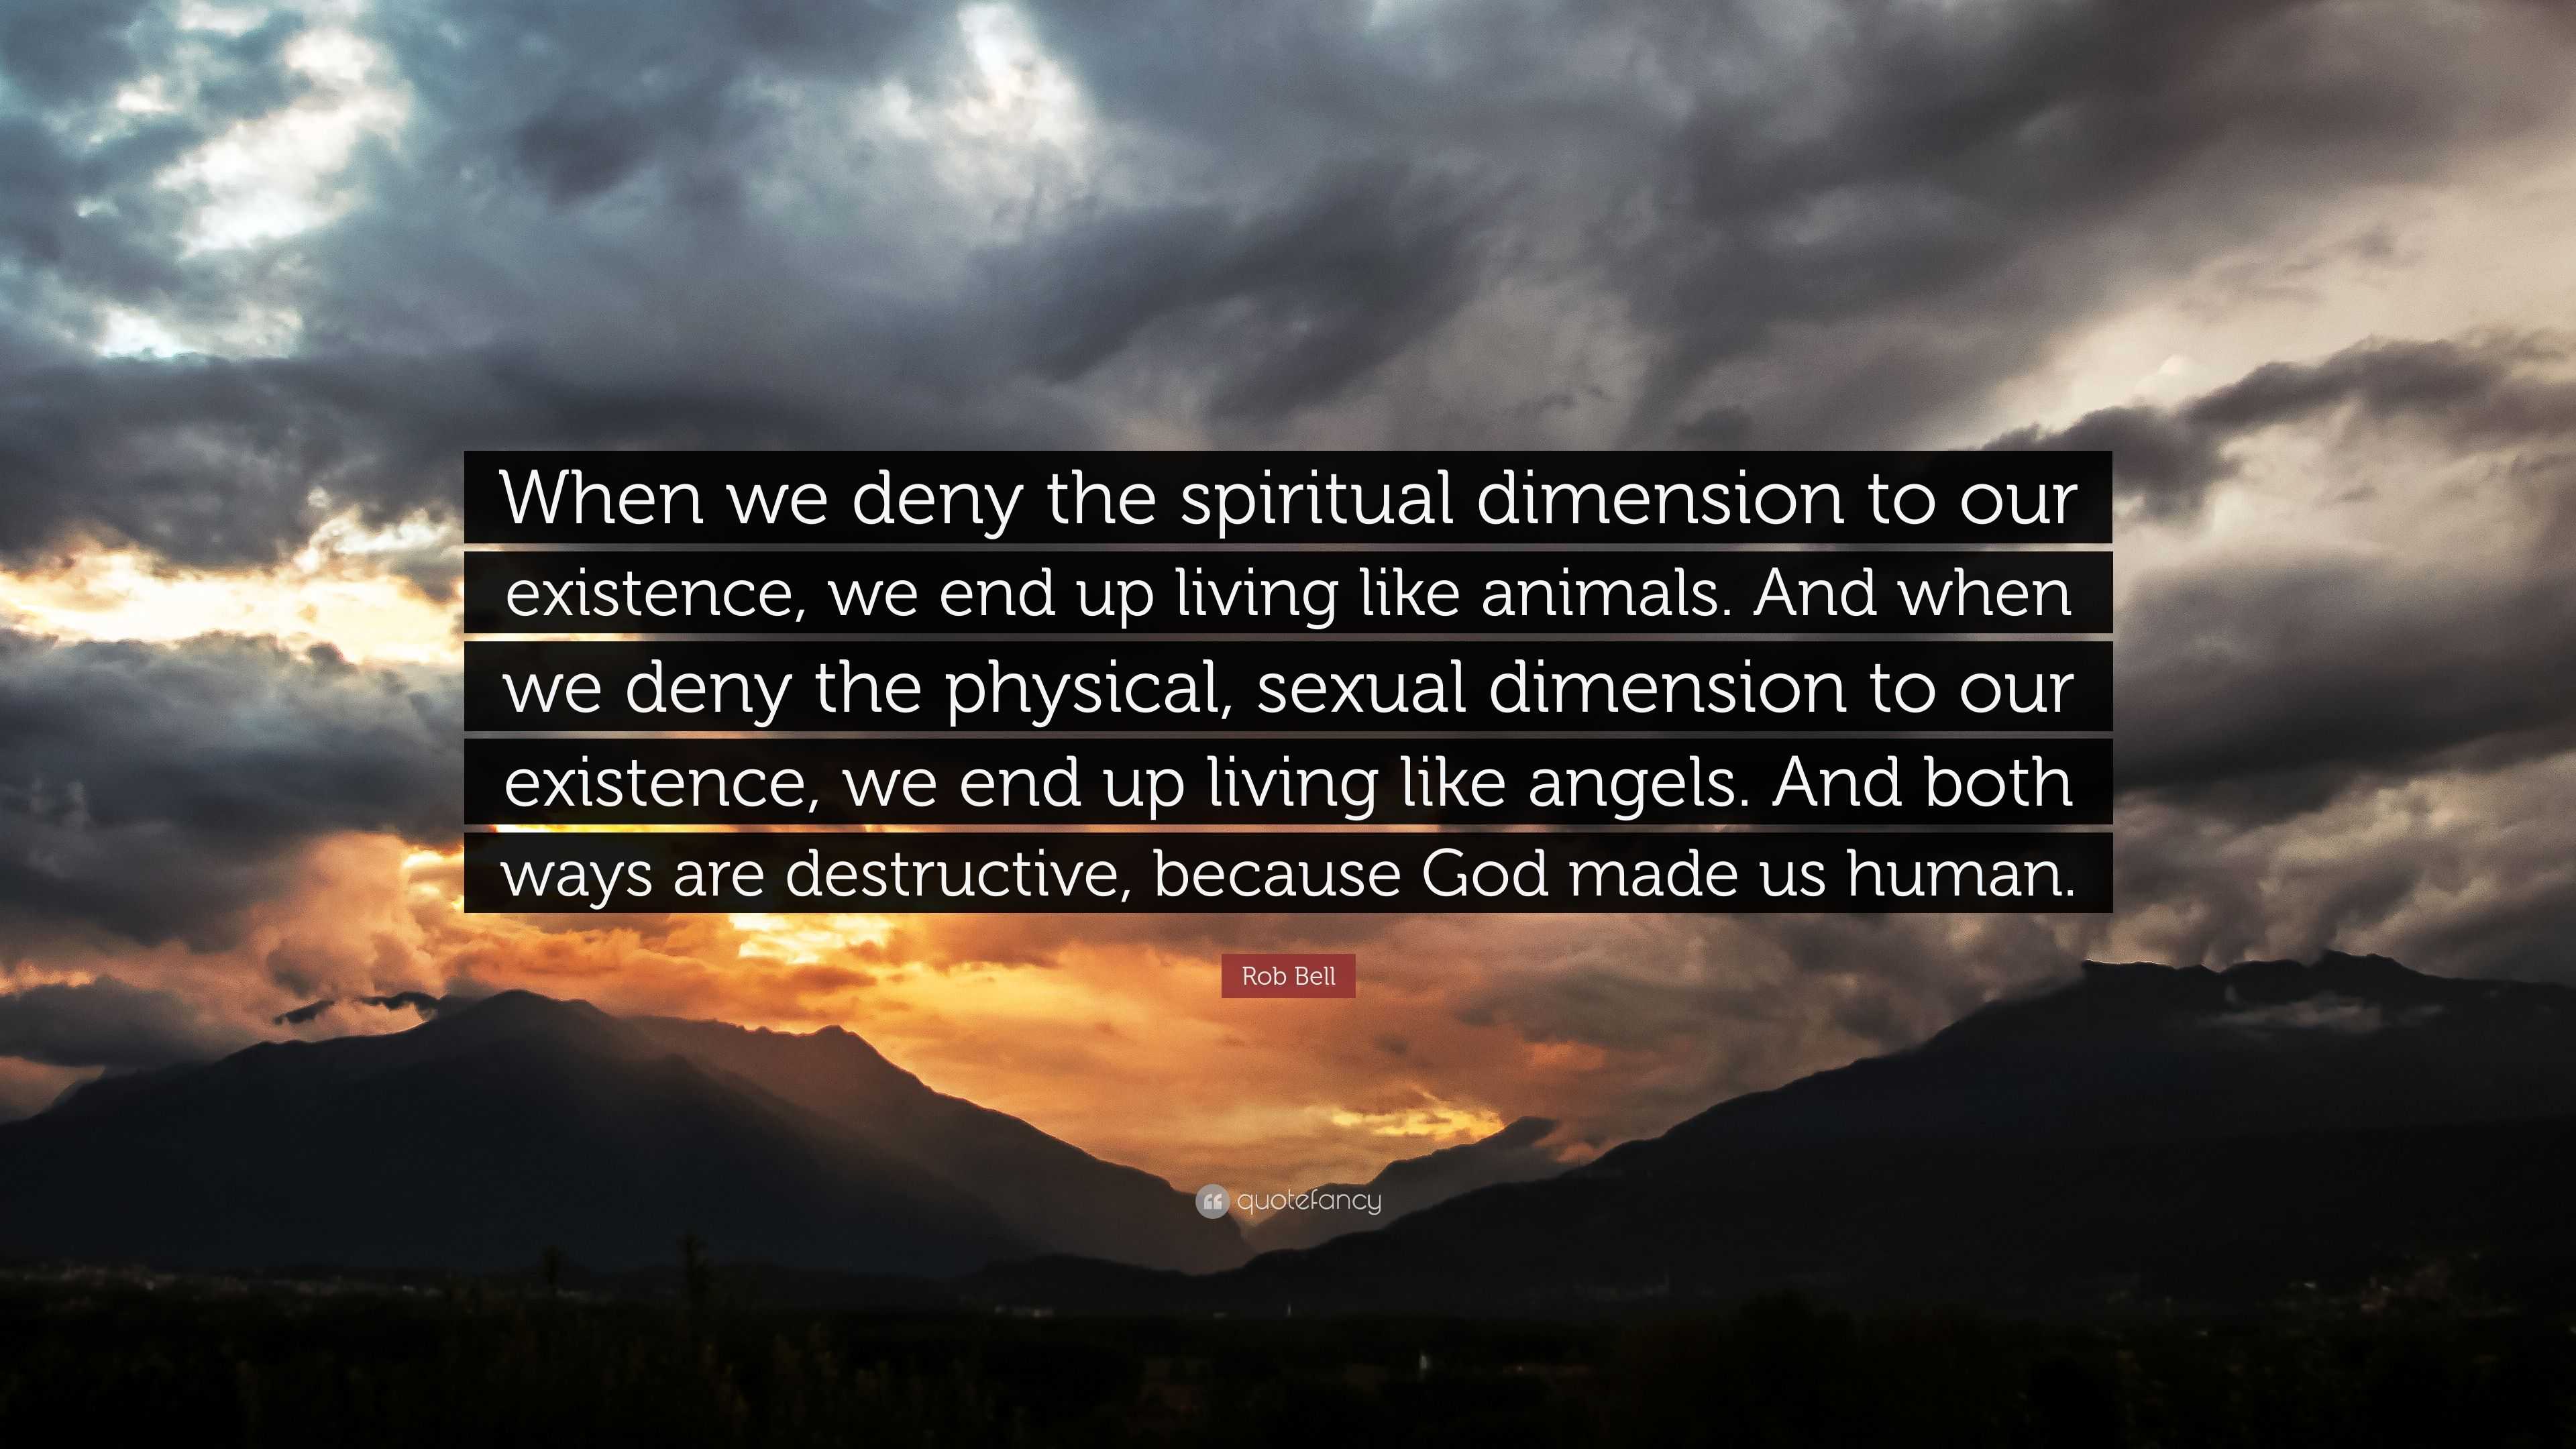 Rob Bell Quote When We Deny The Spiritual Dimension To Our Existence We End Up Living Like Animals And When We Deny The Physical Sex